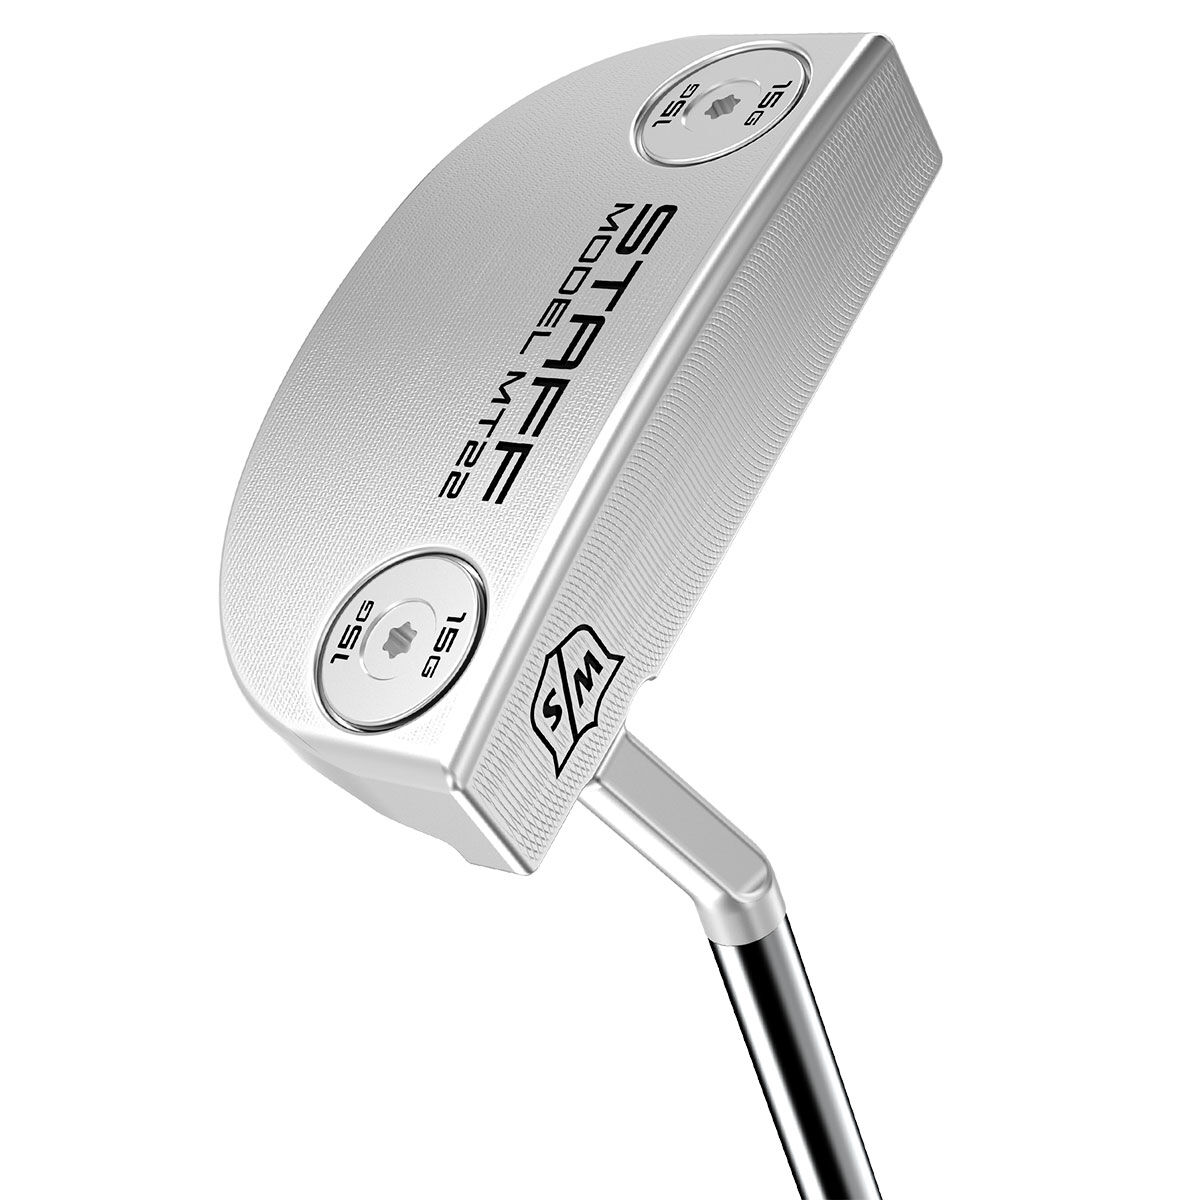 Wilson Staff Silver Model MT22 Right Hand Golf Putter, Size: 34" | American Golf, 34 inches